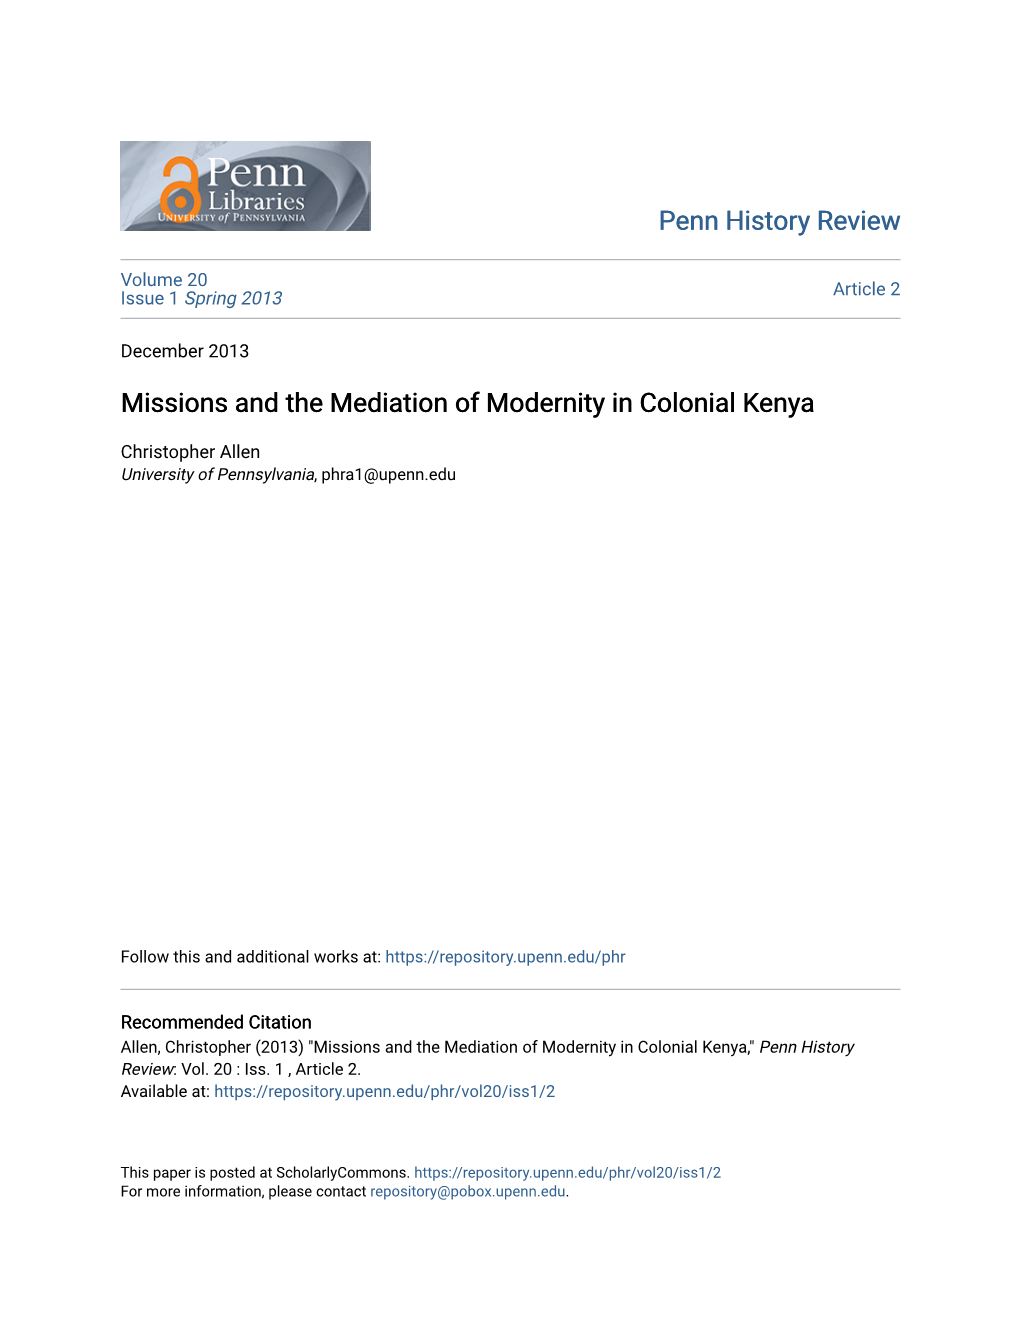 Missions and the Mediation of Modernity in Colonial Kenya